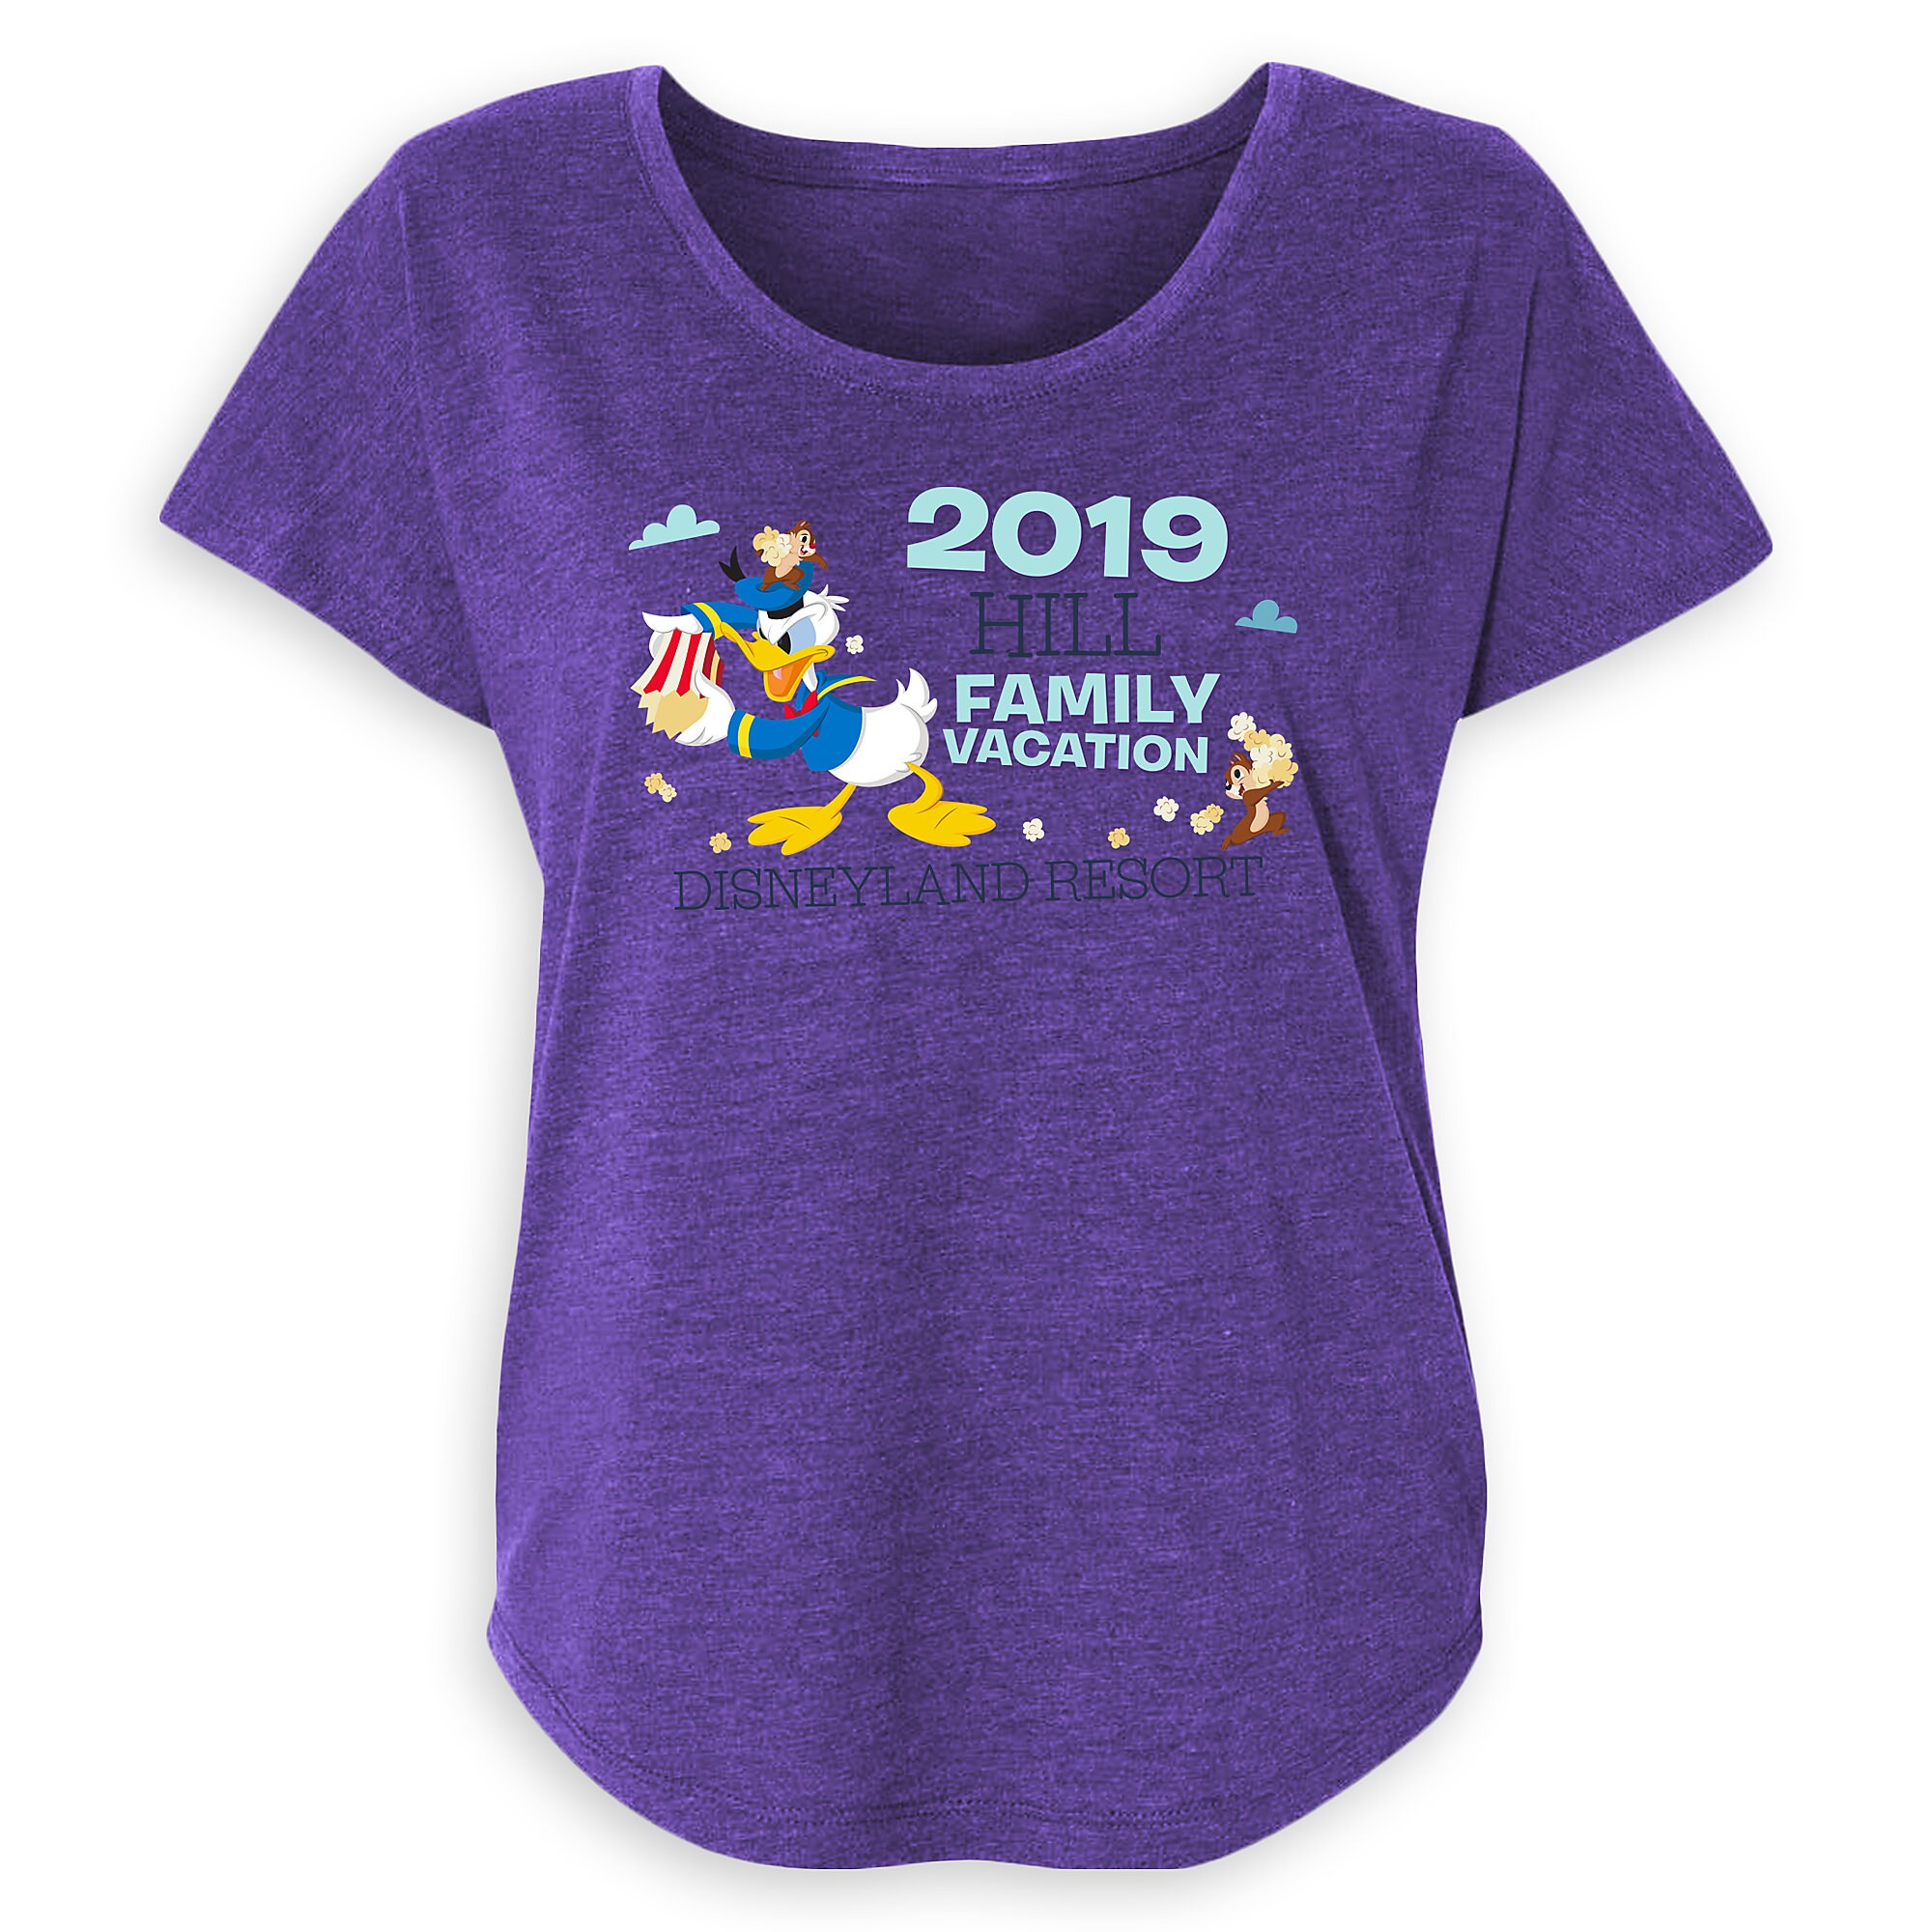 Women's Donald Duck and Chip 'n Dale Family Vacation T-Shirt - Disneyland Resort - Customized